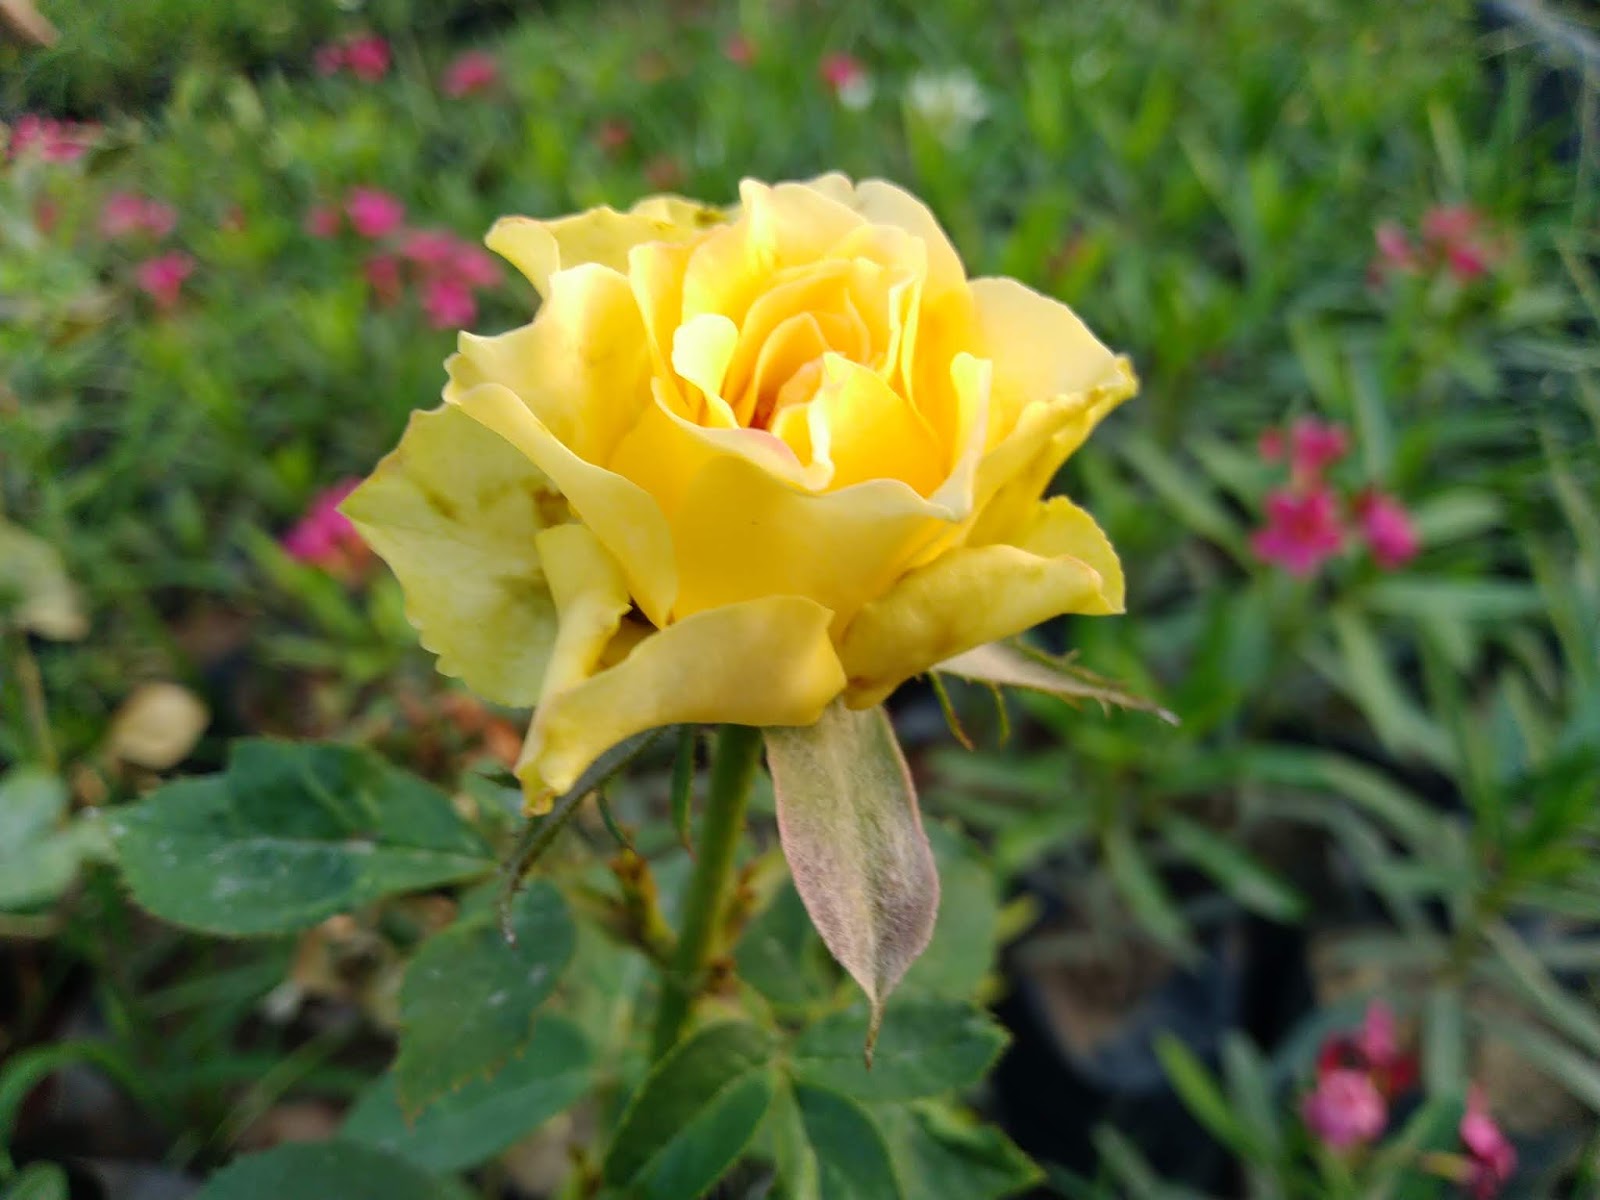 Asus Zenfone Max Pro M1 camera test samples review